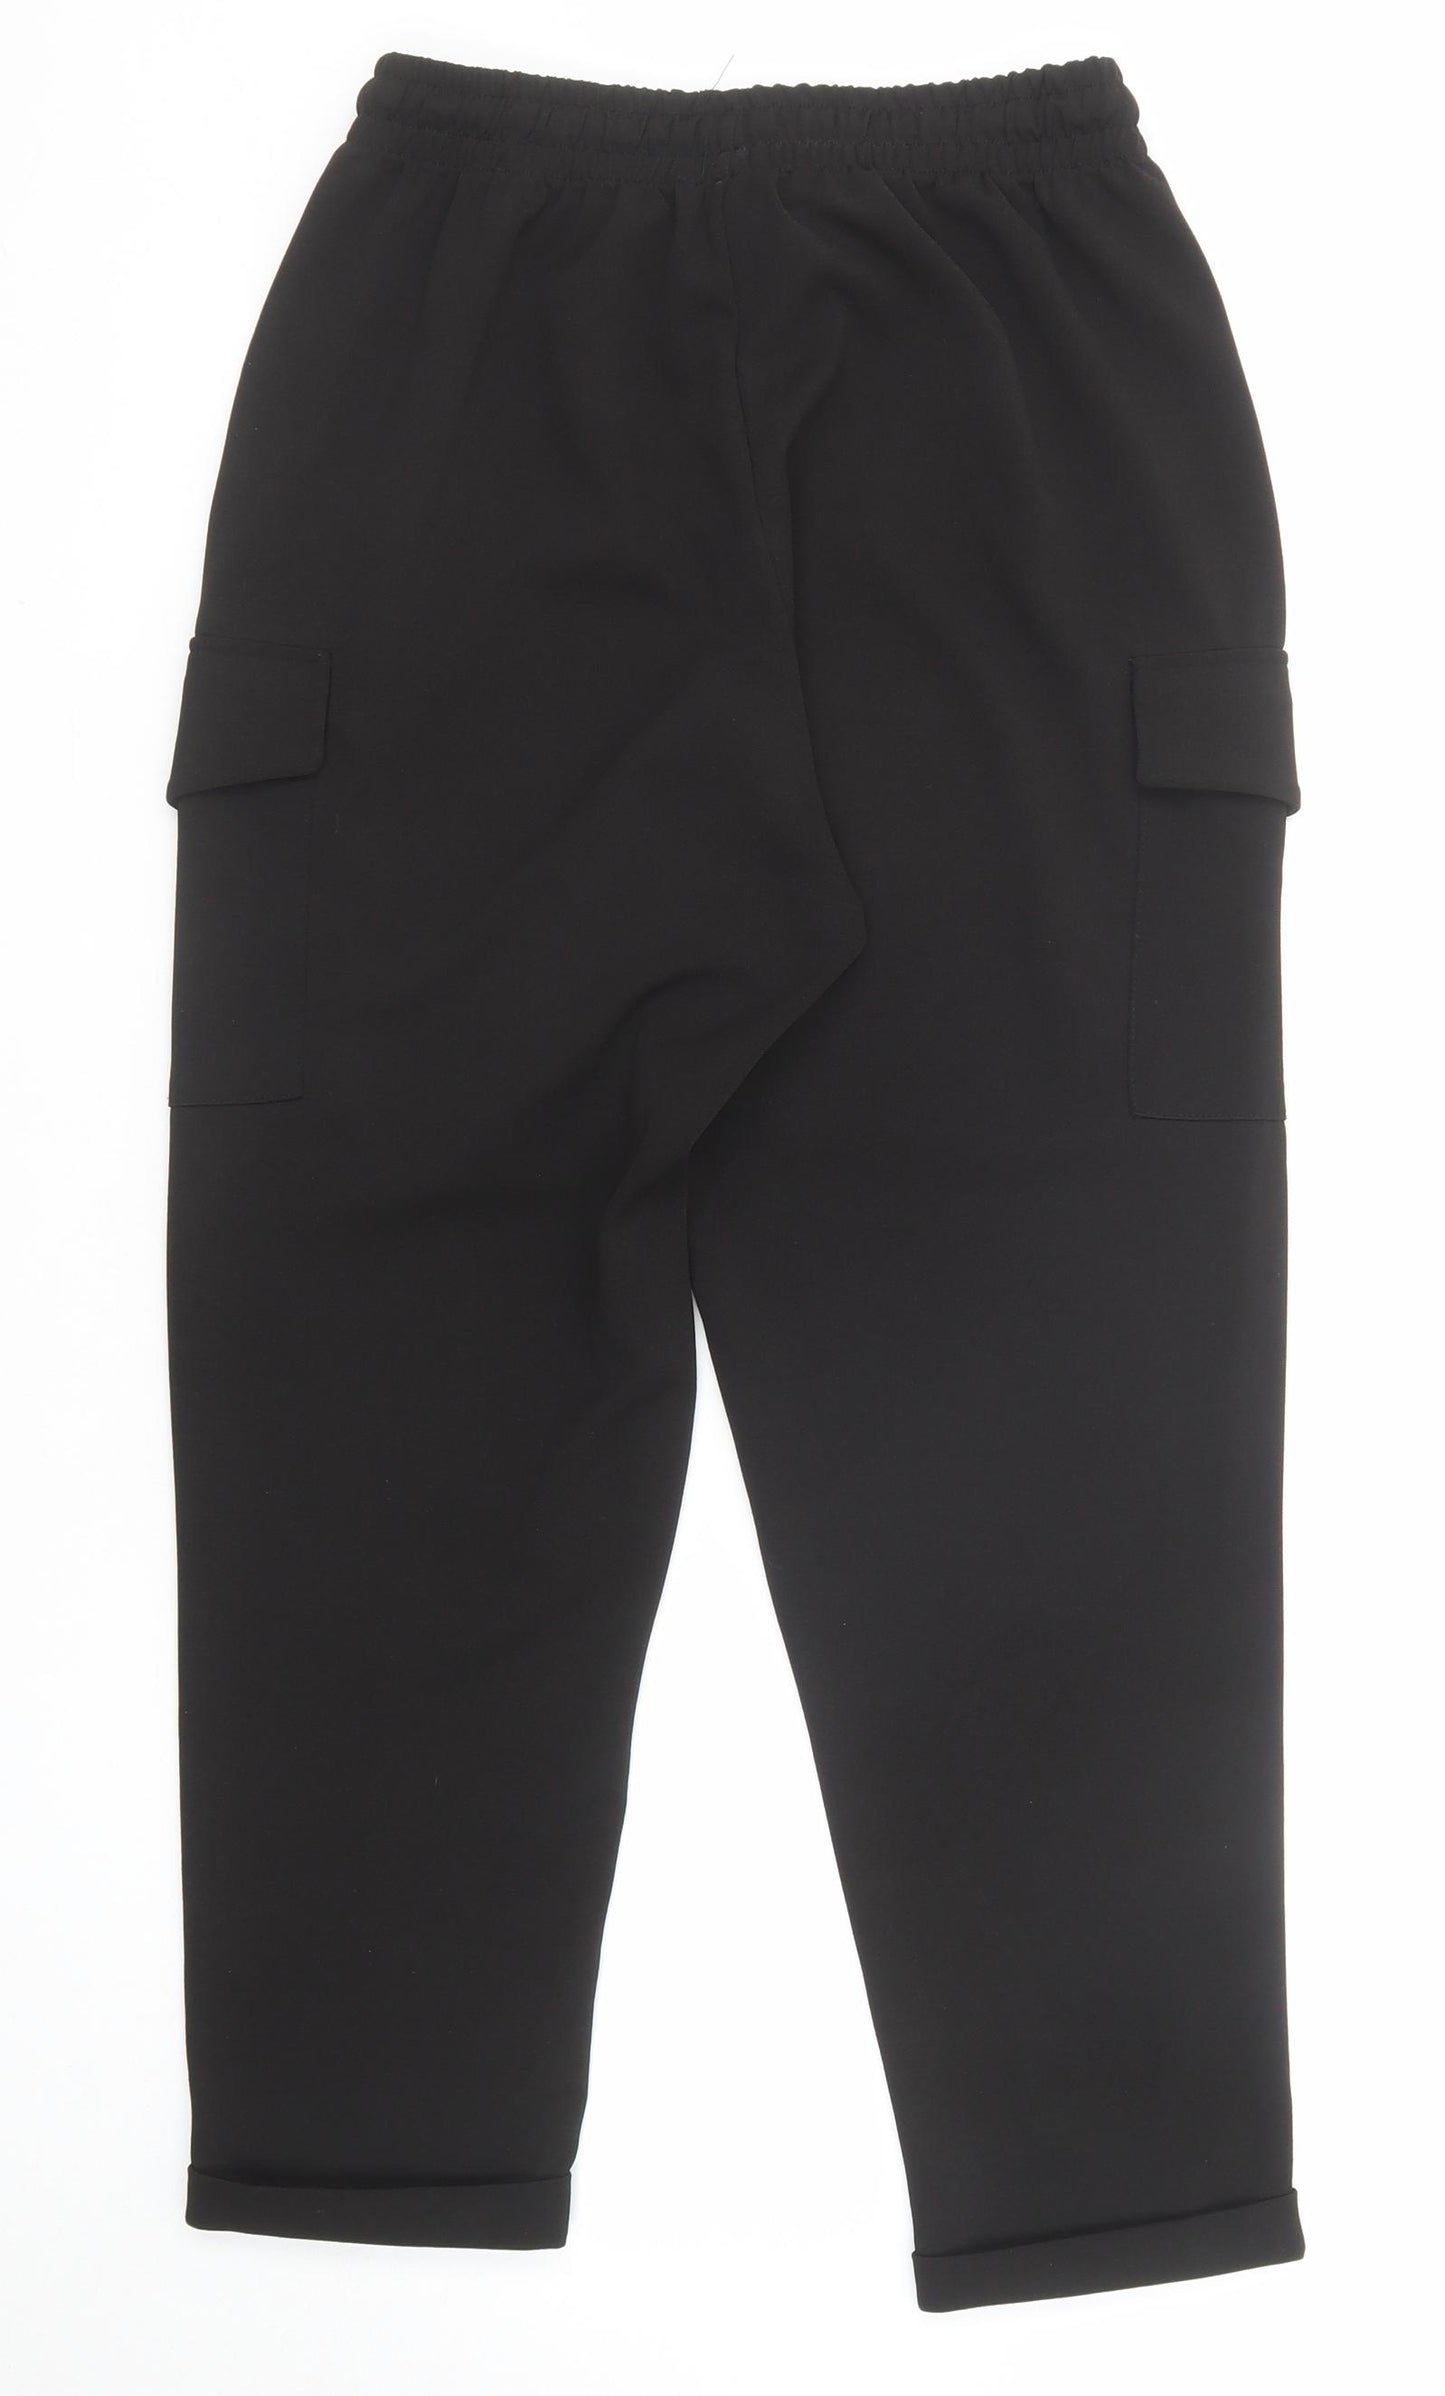 New Look Womens Black Polyester Cargo Trousers Size 10 Regular Drawstring